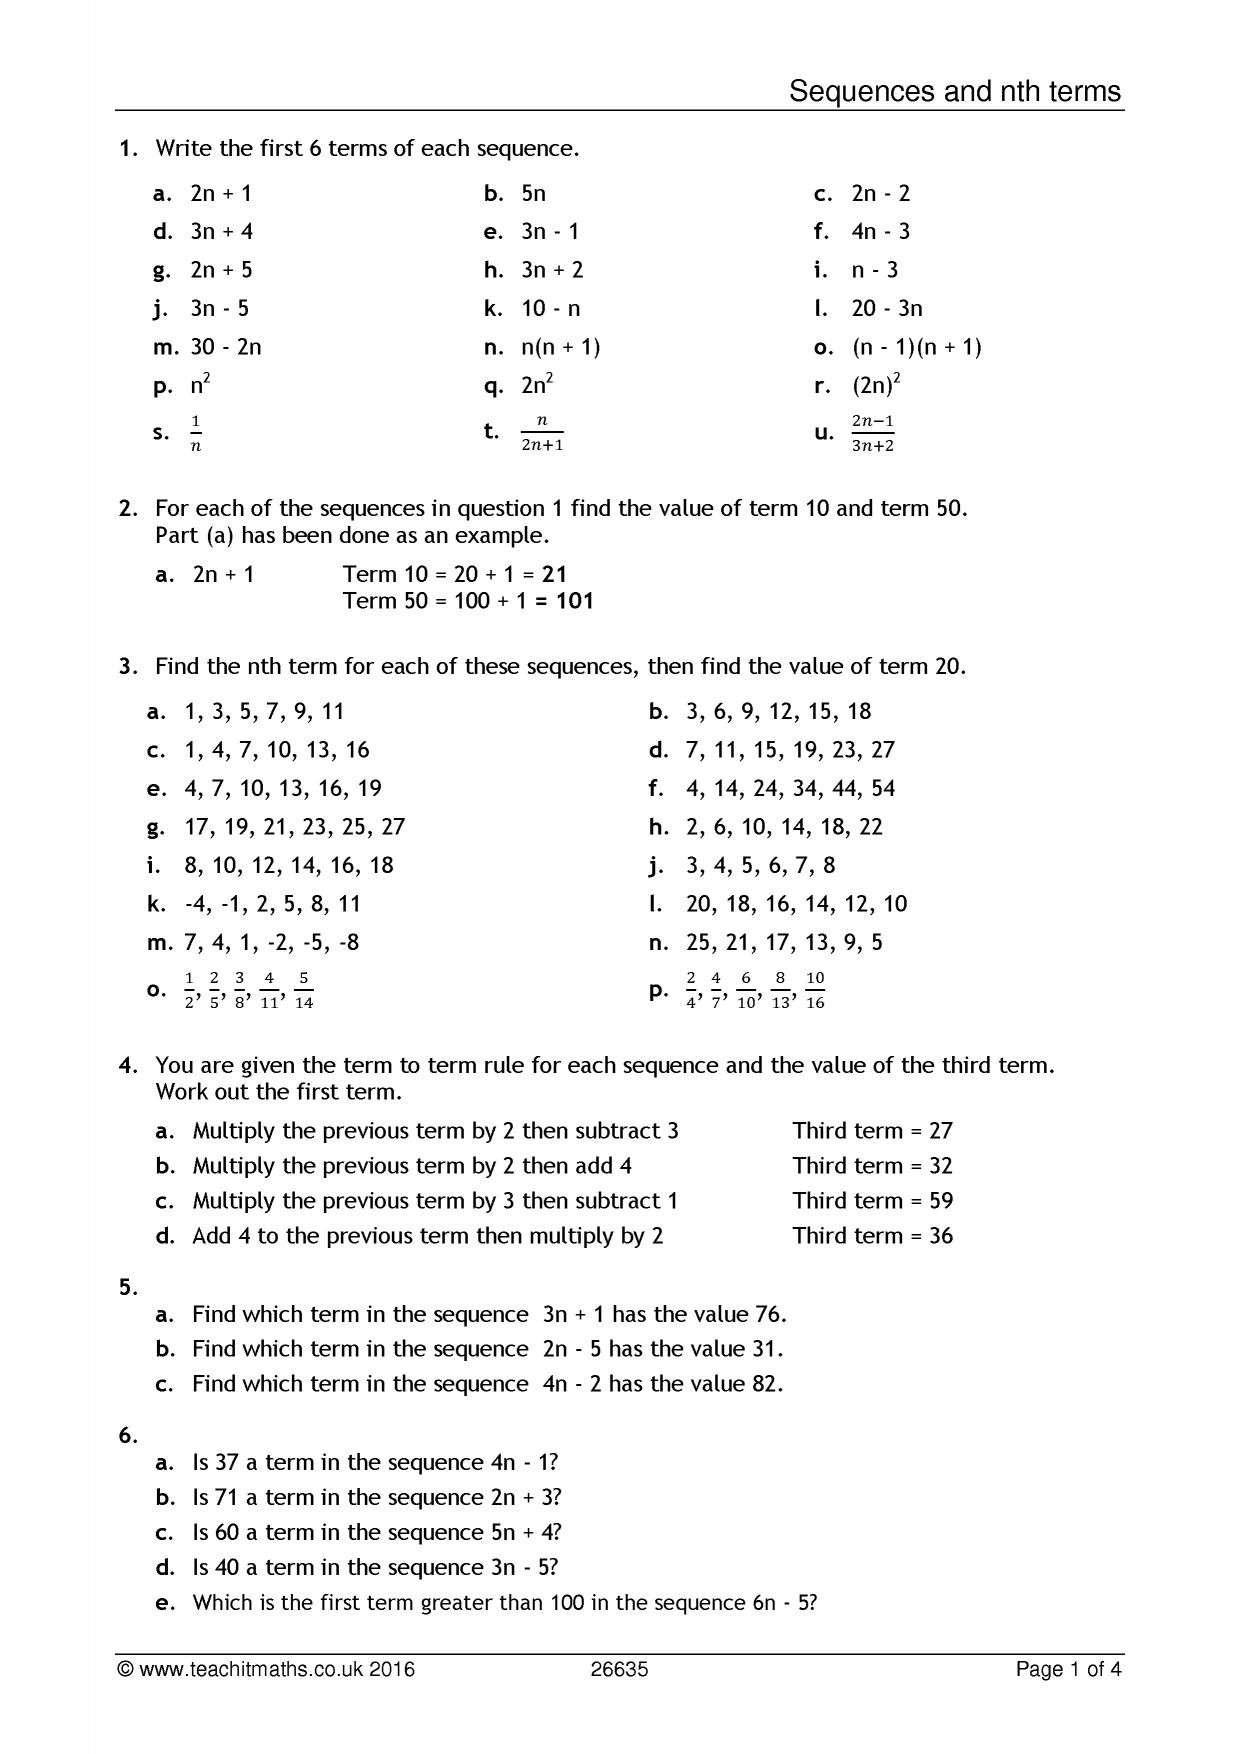 Arithmetic Sequences and Series Worksheet Sequences and Nth Terms Worksheet [pdf] Teachit Maths